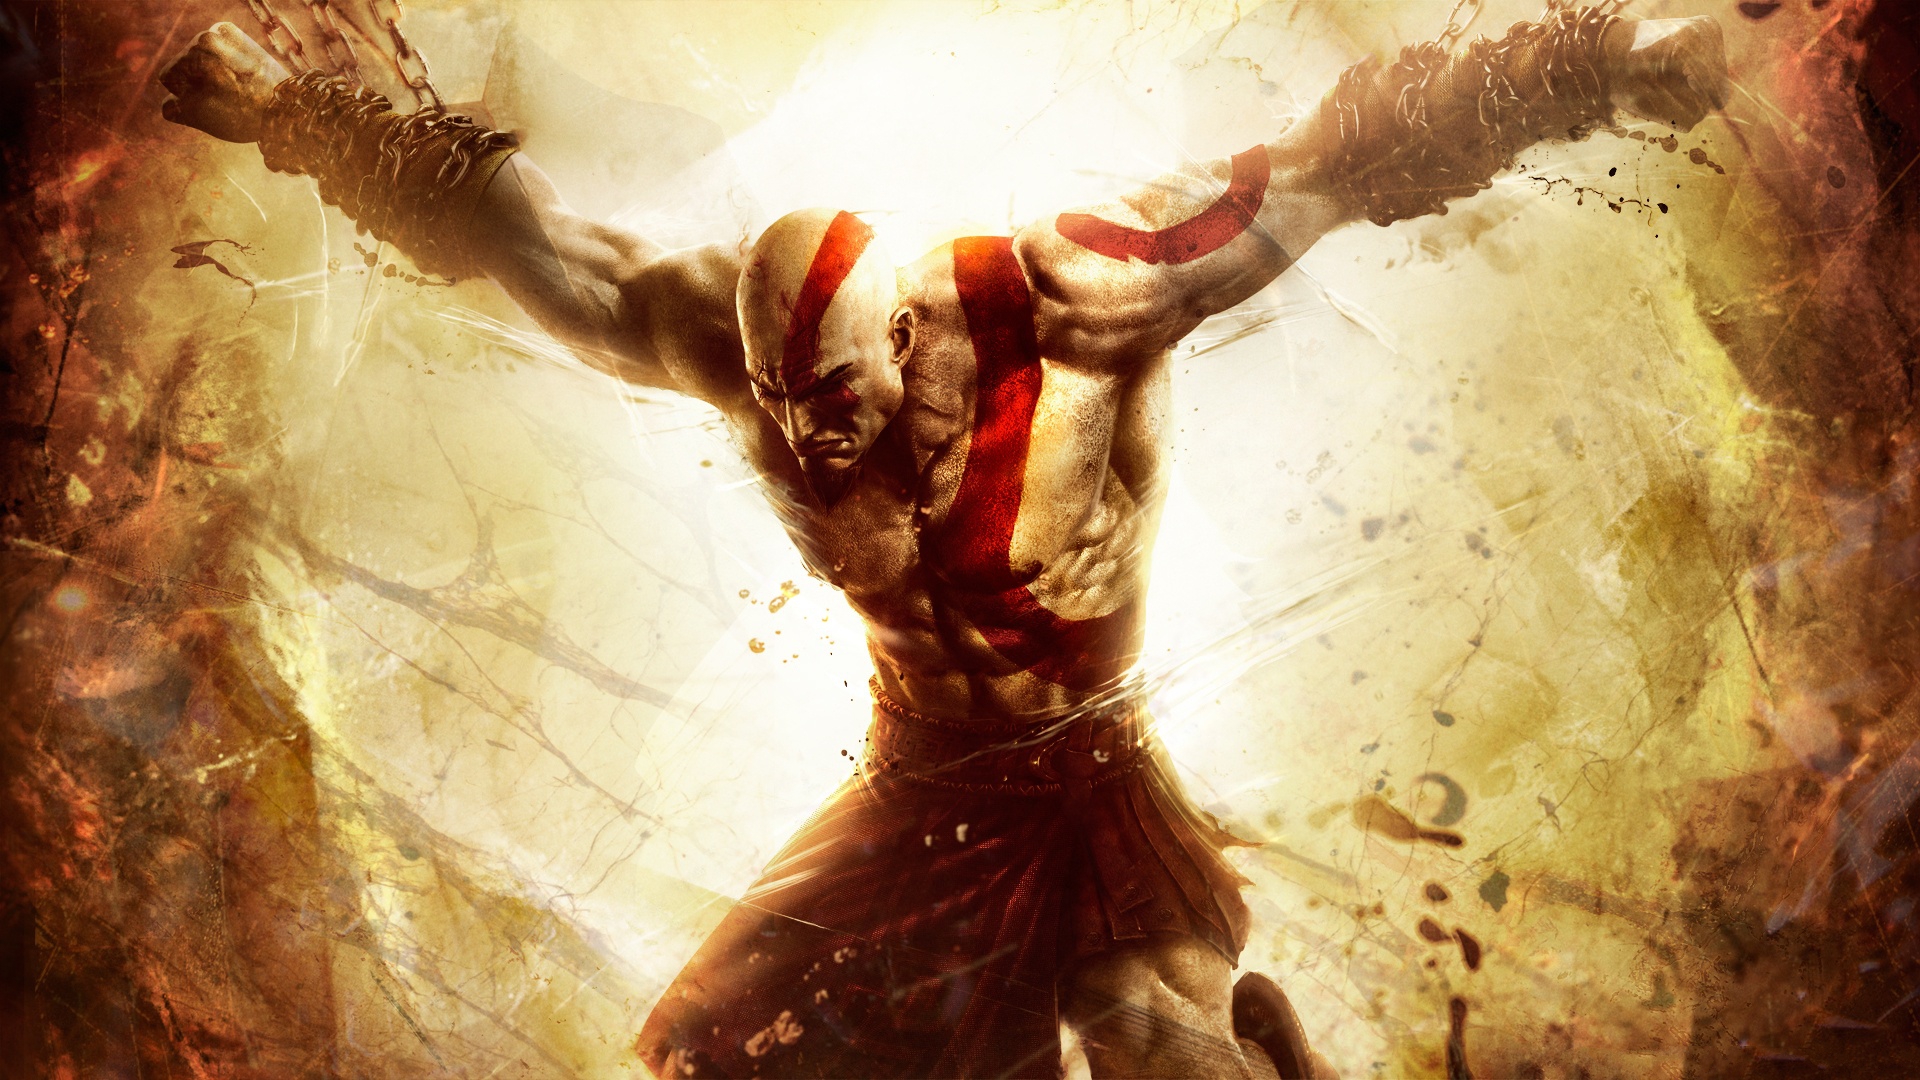 download god of war 3 rpcs3 for free